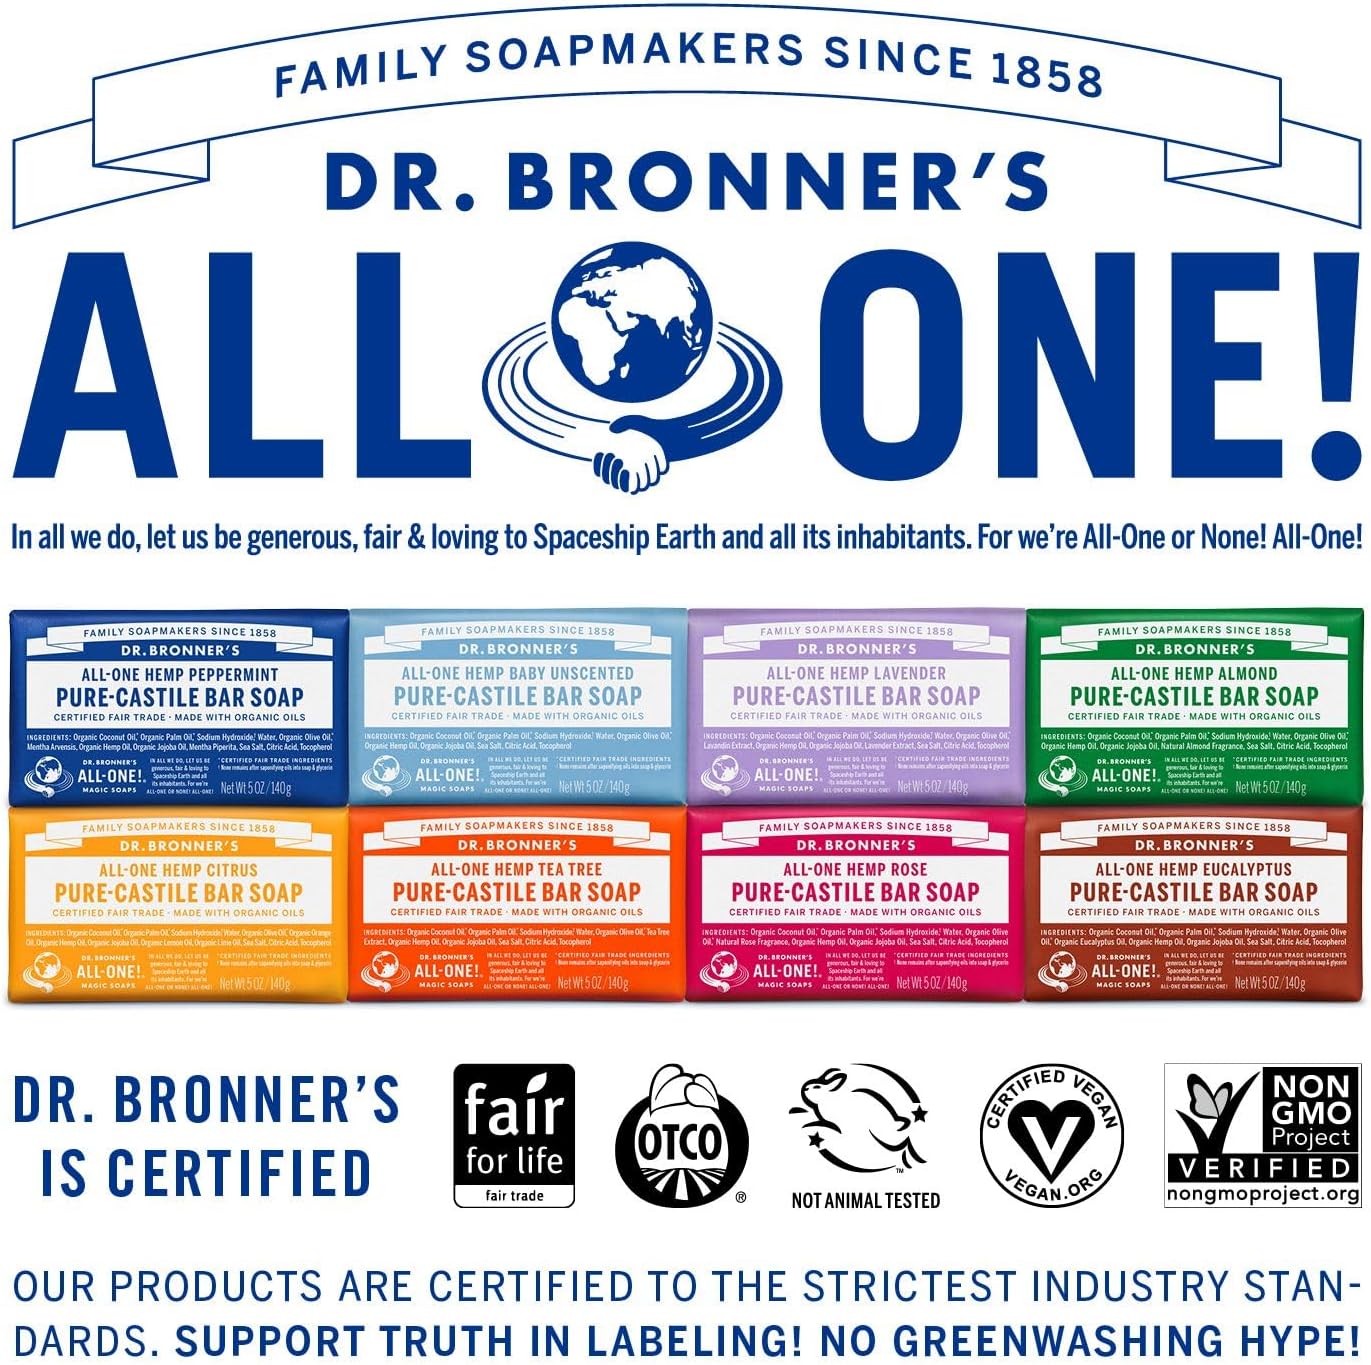 Dr. Bronner's - Pure-Castile Bar Soap (Lavender, 5 ounce) - Made with Organic Oils, For Face, Body and Hair, Gentle and Moisturizing, Biodegradable, Vegan, Cruelty-free, Non-GMO : Baby Bar Soaps : Beauty & Personal Care